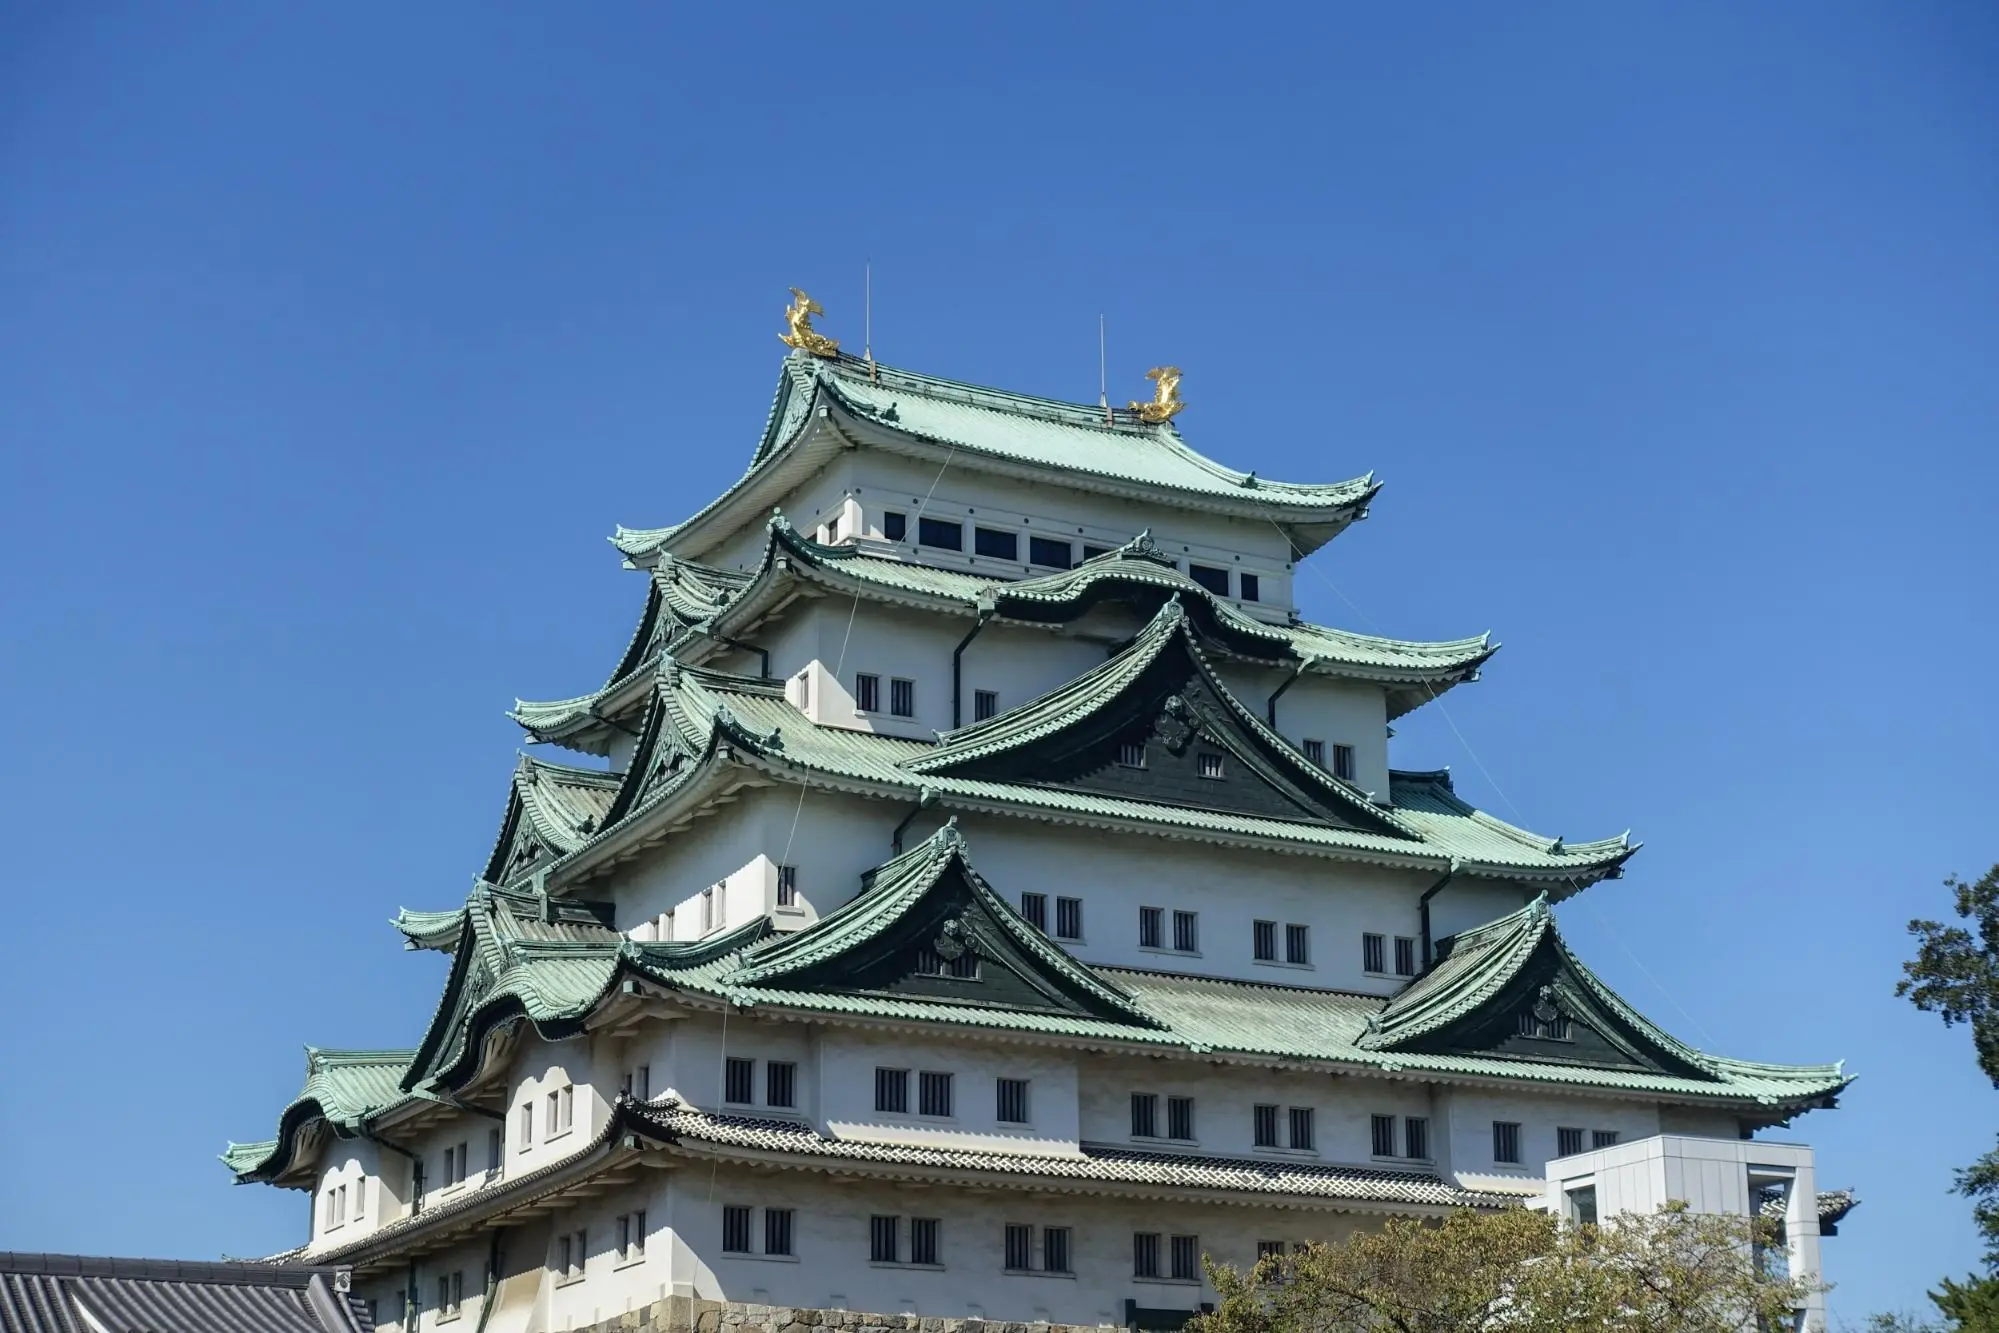 5 Key Points to Enjoy Nagoya Castle! Report on Must-See Highlights from Honmaru Goten to Gourmet Delights!